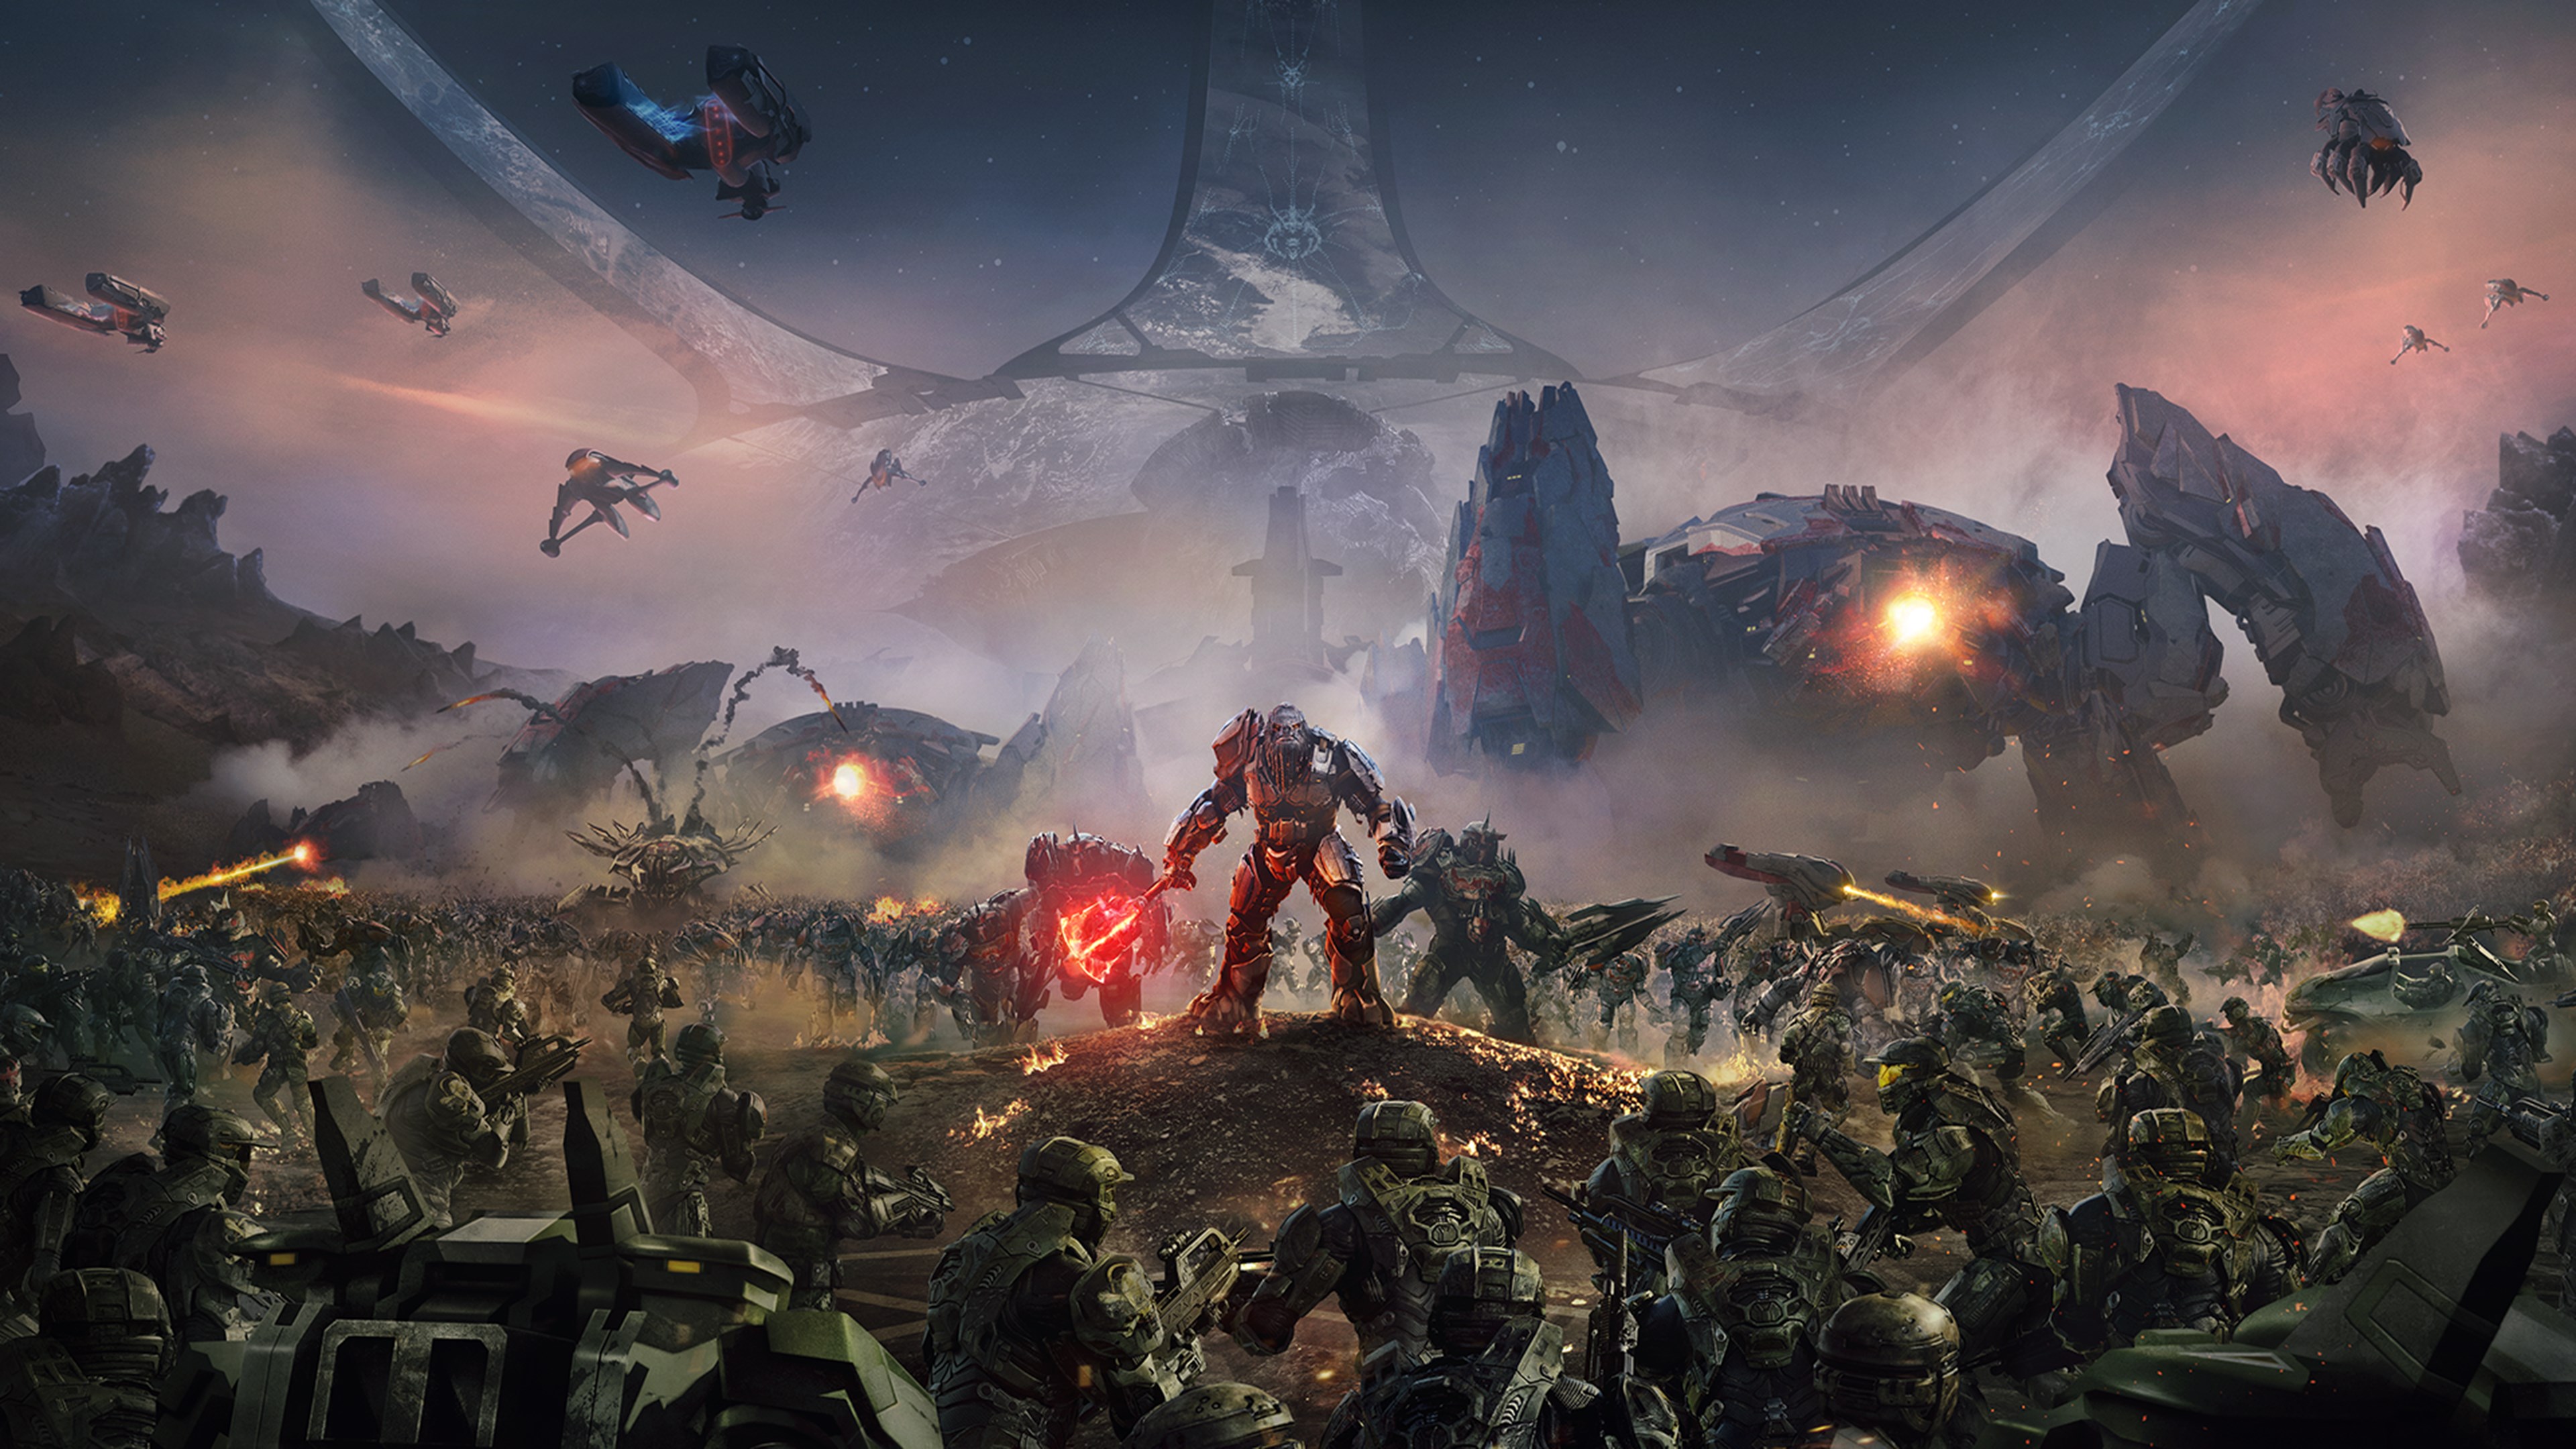 Find the best laptops for Halo Wars 2